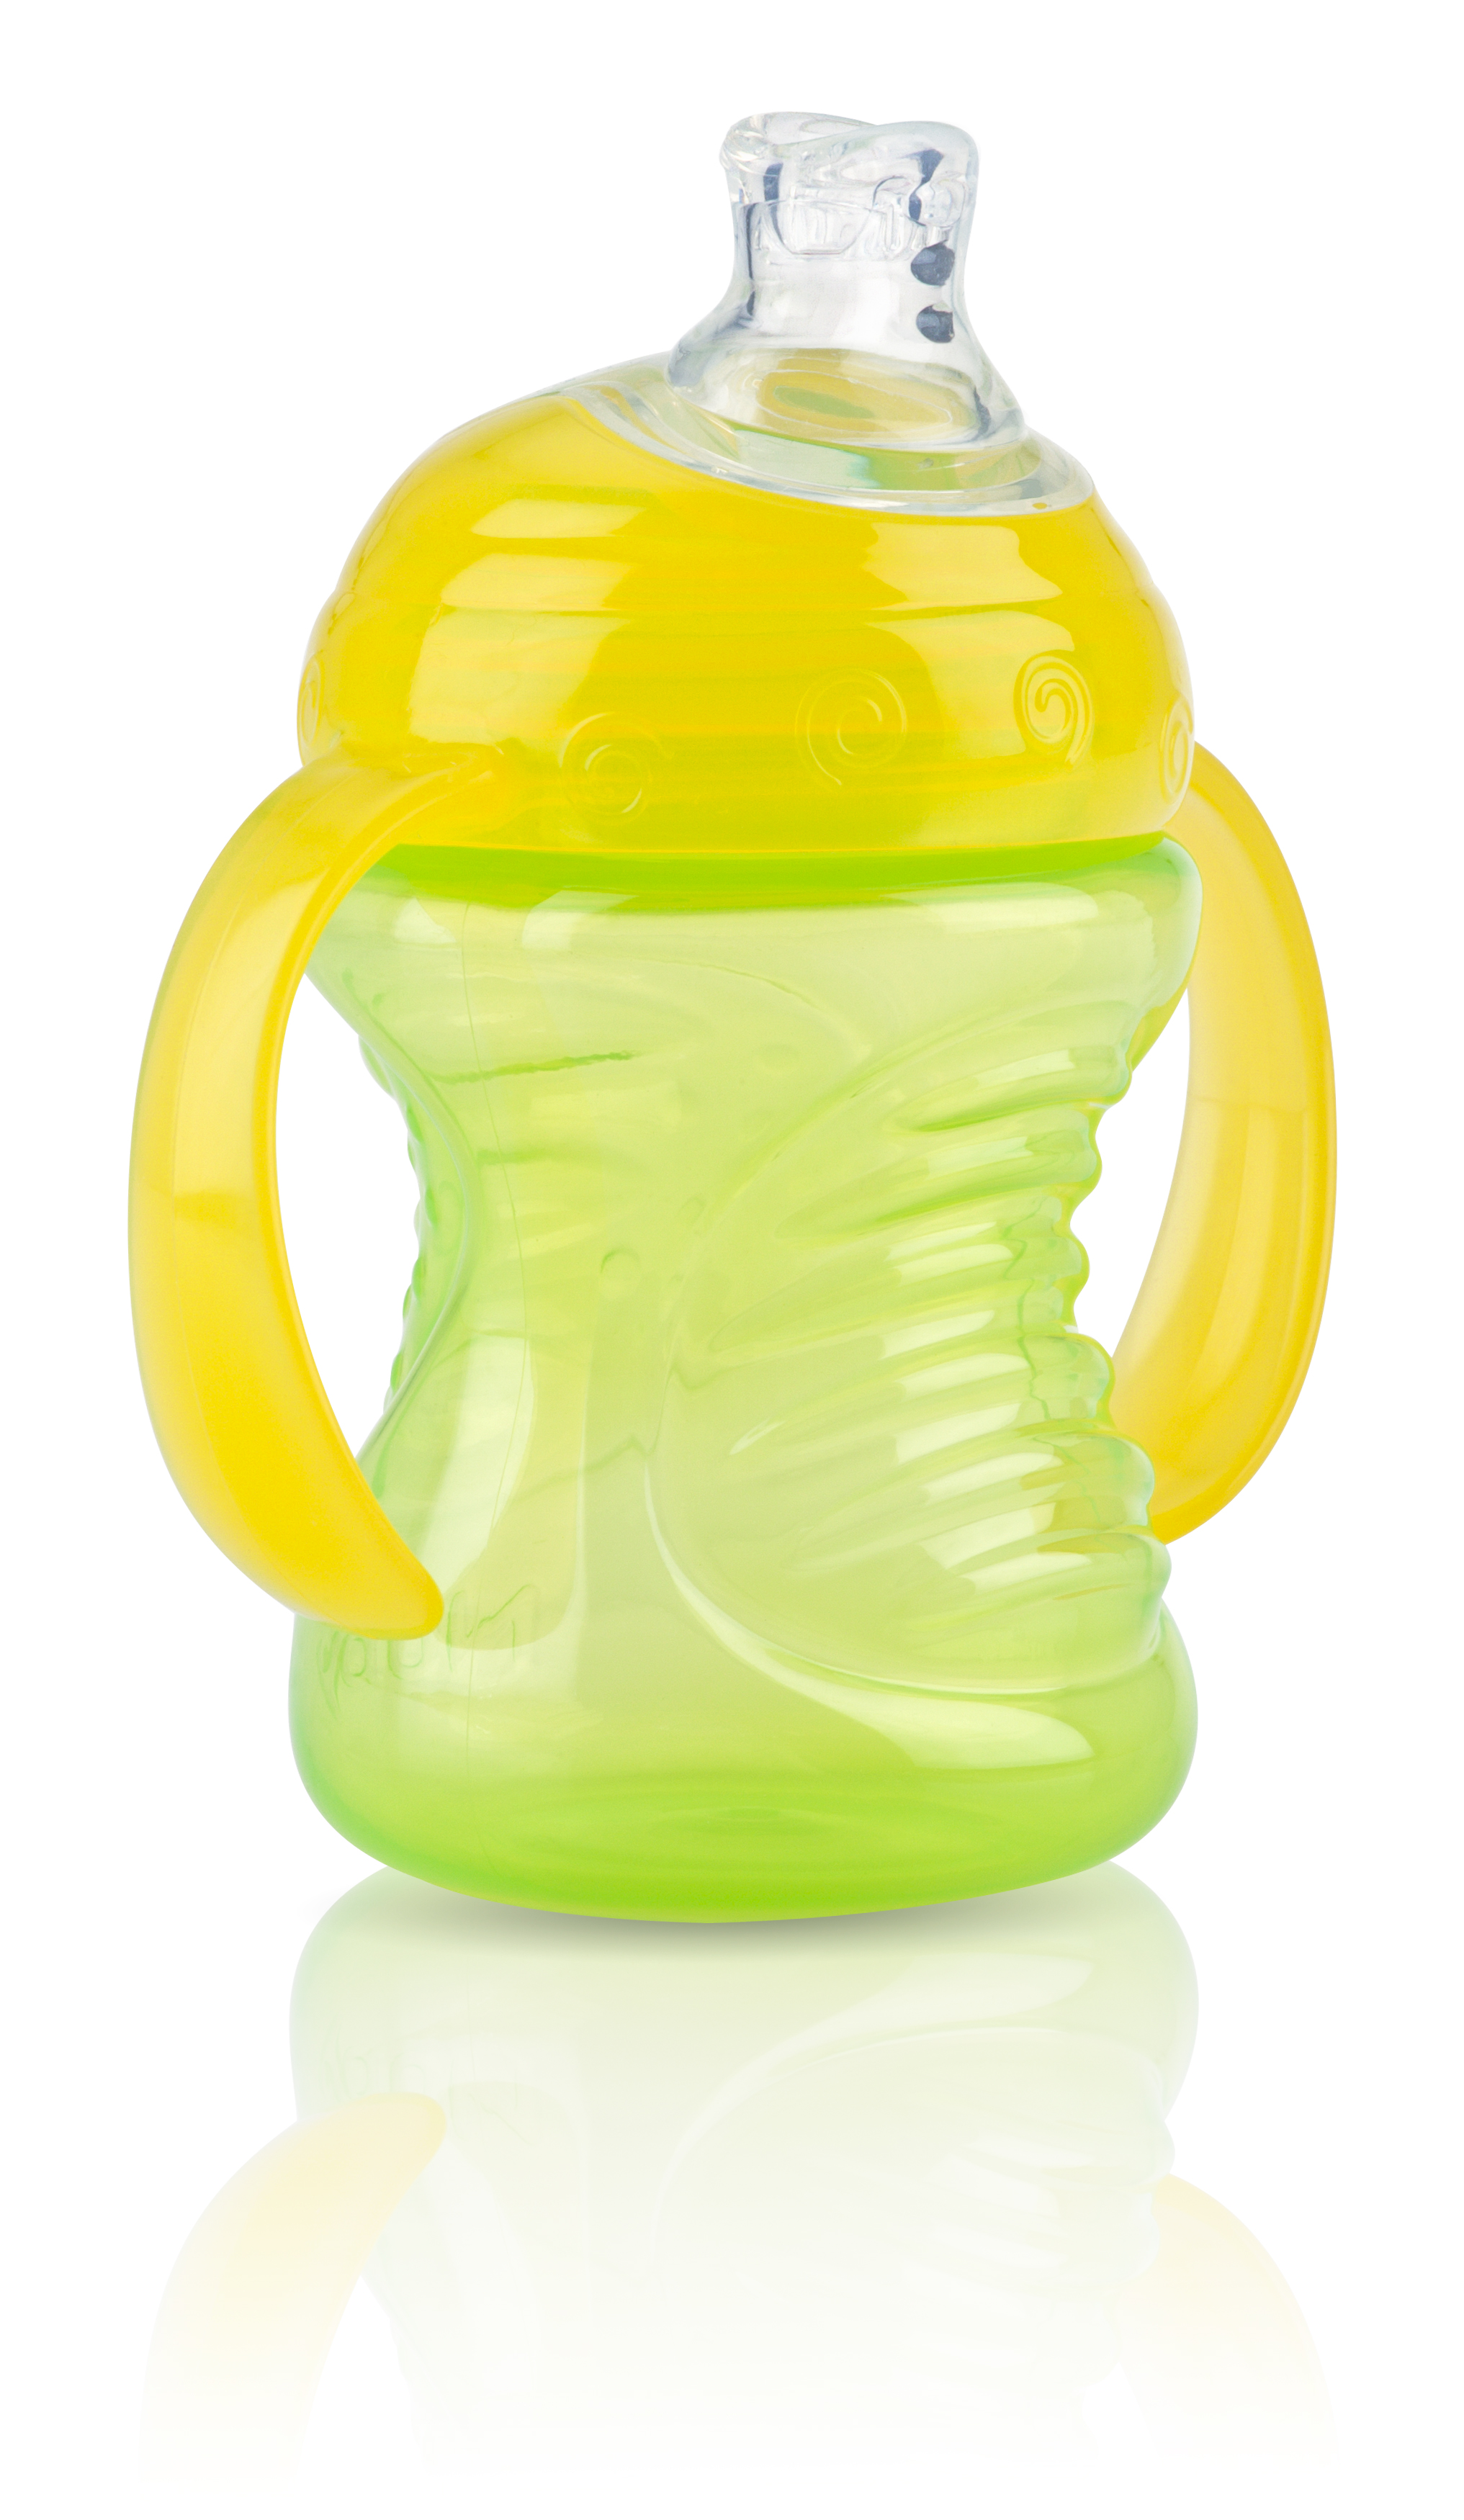 Nuby No-Spill Grip N' Sip Trainer Soft Spout Sippy Cup, 8 fl oz, 3 Count - image 3 of 9